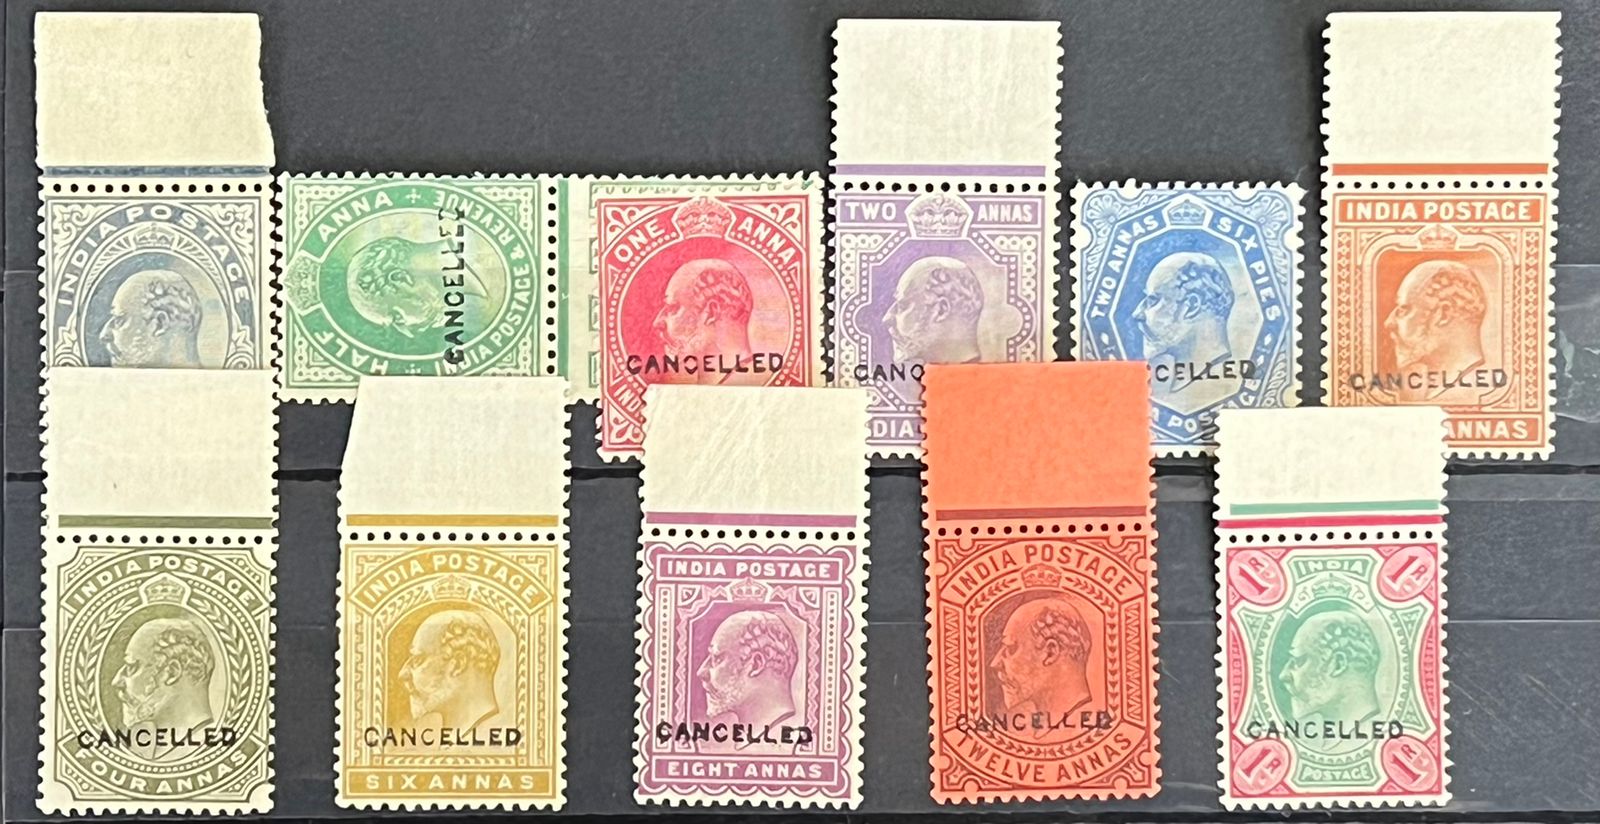 India 1902 KEVII Set to 1Re ‘CANCELLED’ Overprint Rare